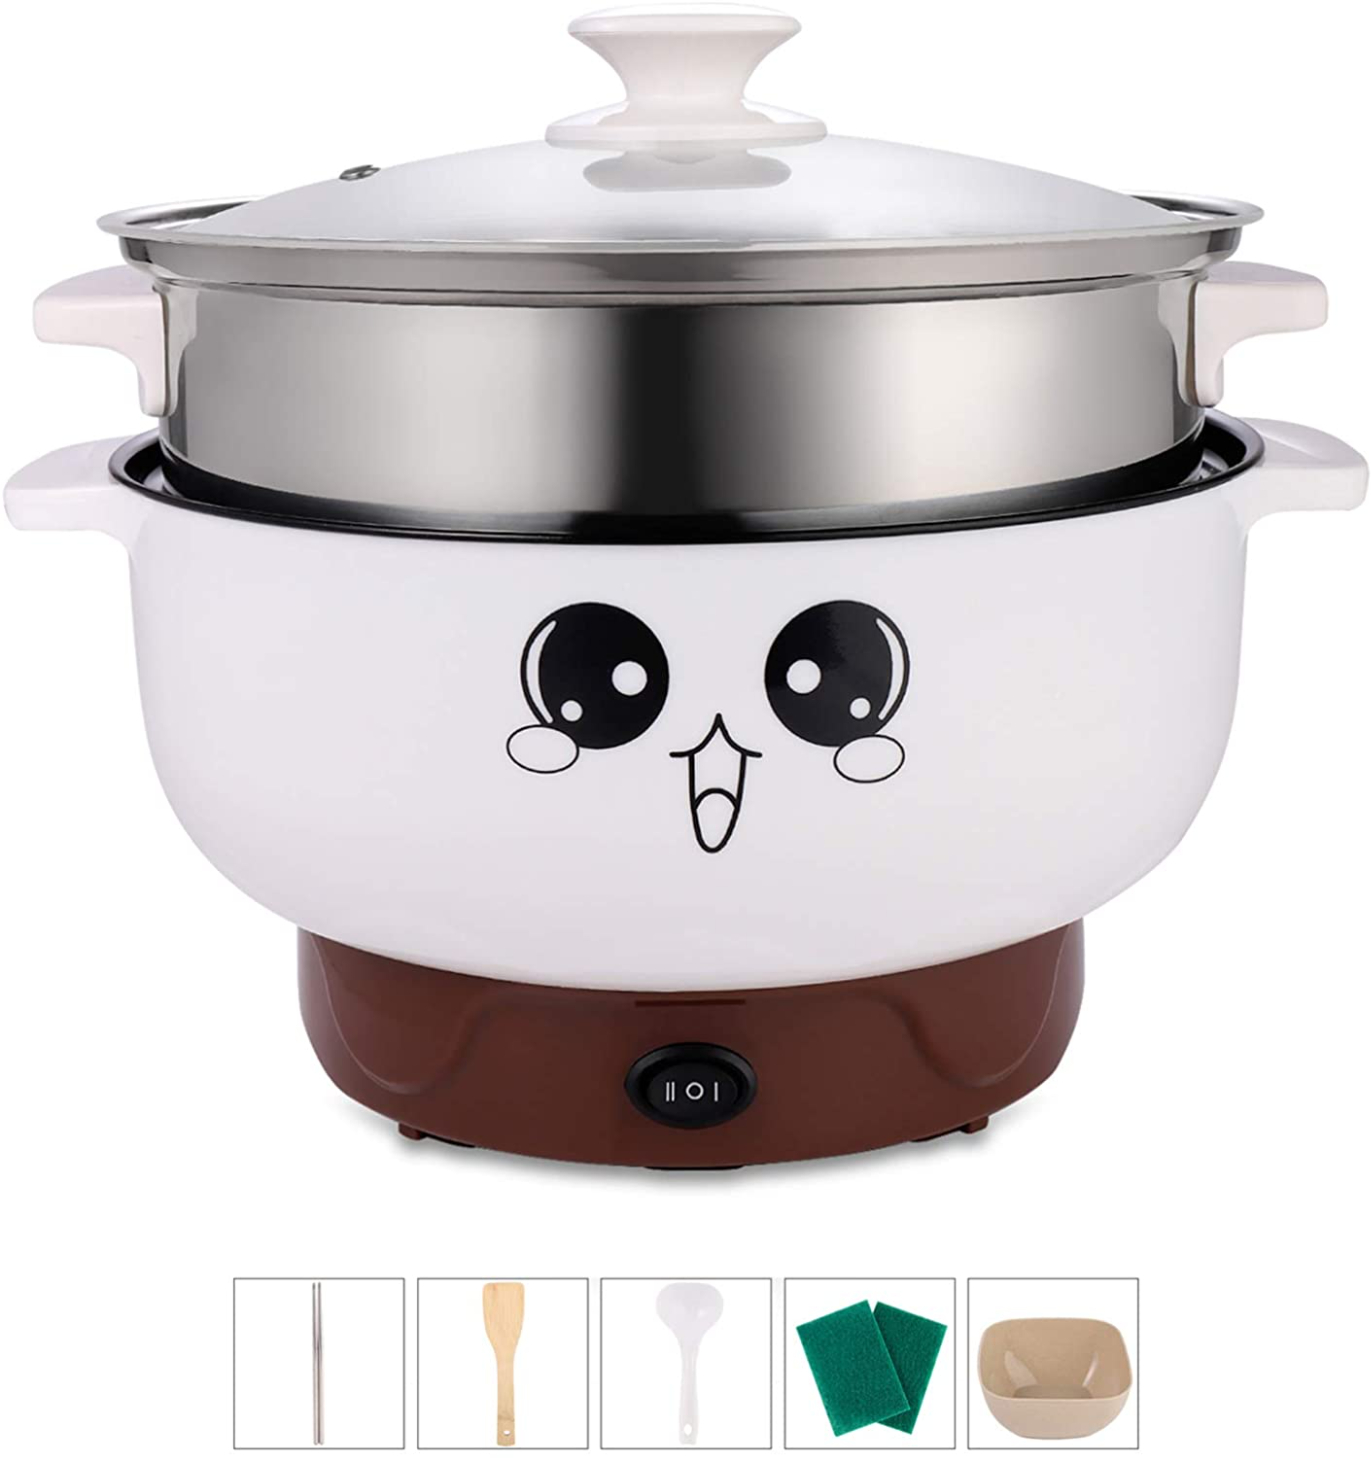 4-IN-1 Multifunction Electric Cooker Skillet Grill Pot Wok Electric Hot Pot for Noodles Cook Rice Fried Stew Soup Steamed Fish Boiled Egg Small Non-stick (2.3L, with Lid and Steamer)